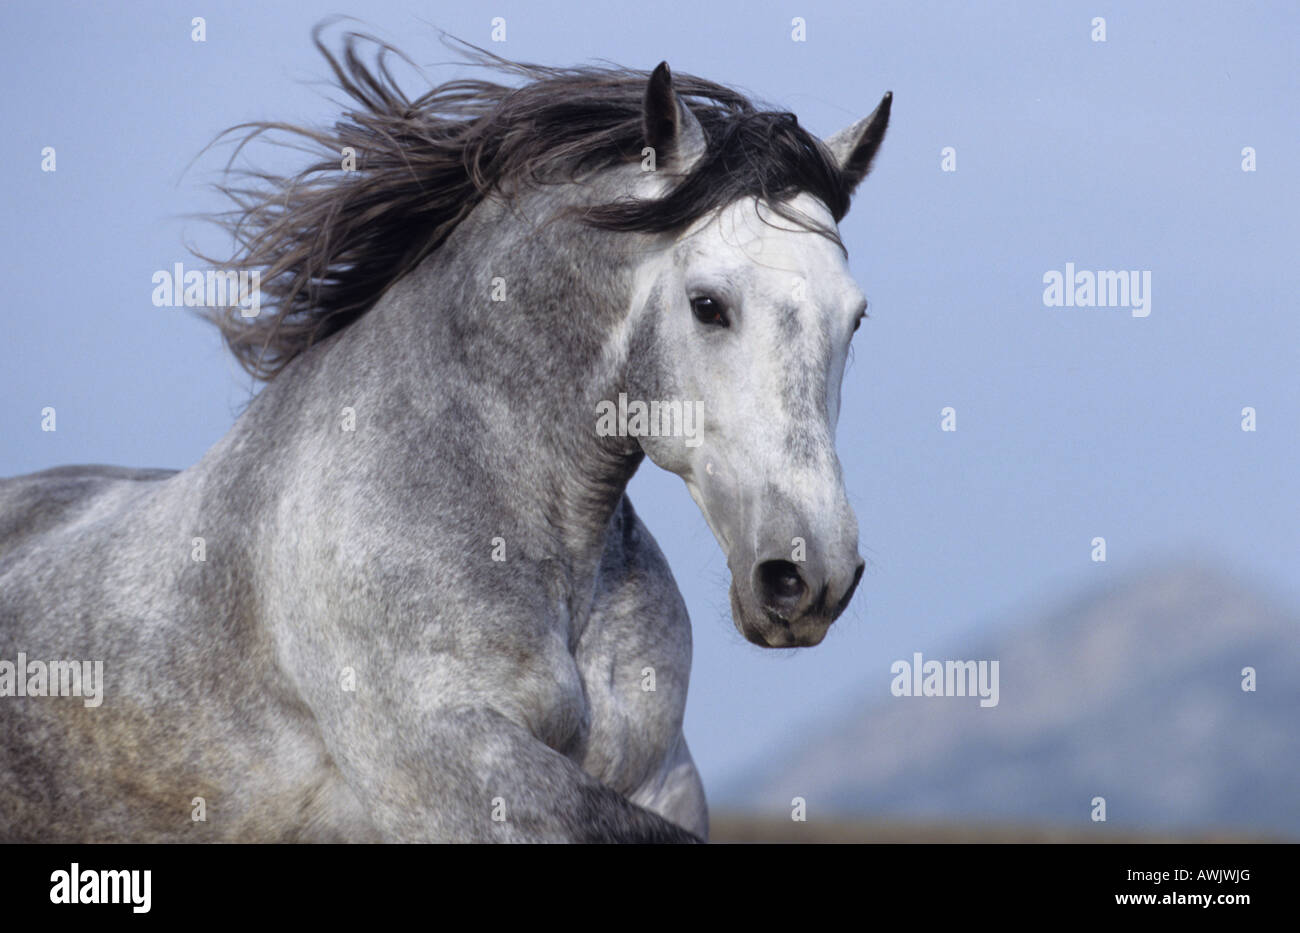 Andalusian Horse (Equus caballus), portrait of stallion with mane flowing Stock Photo